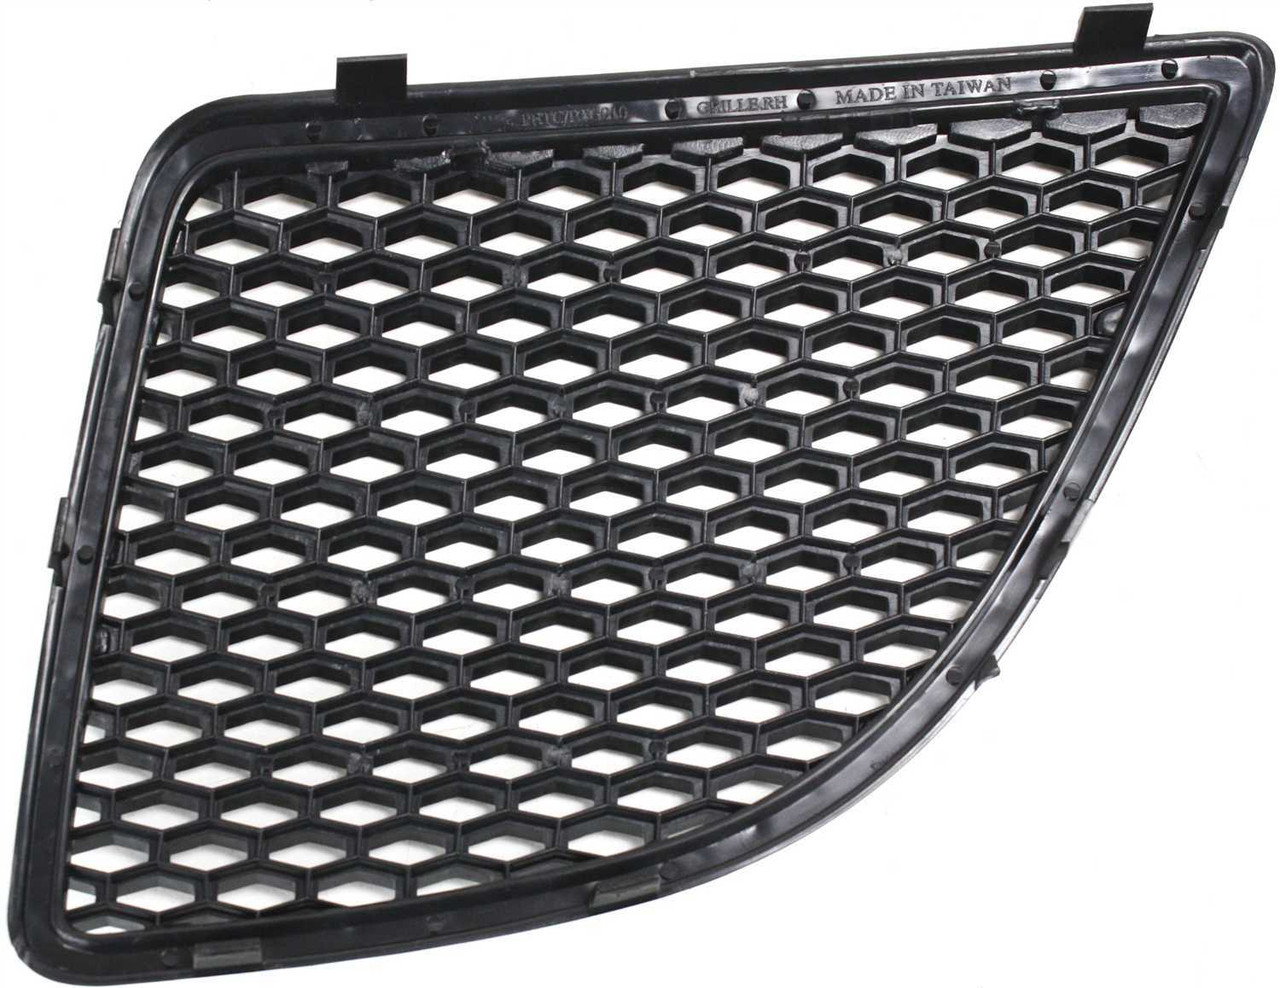 GRAND PRIX 04-08 GRILLE RH, Insert, Plastic, Textured Black Shell and Insert, Base/GT/GT1/GT2/GTP Models